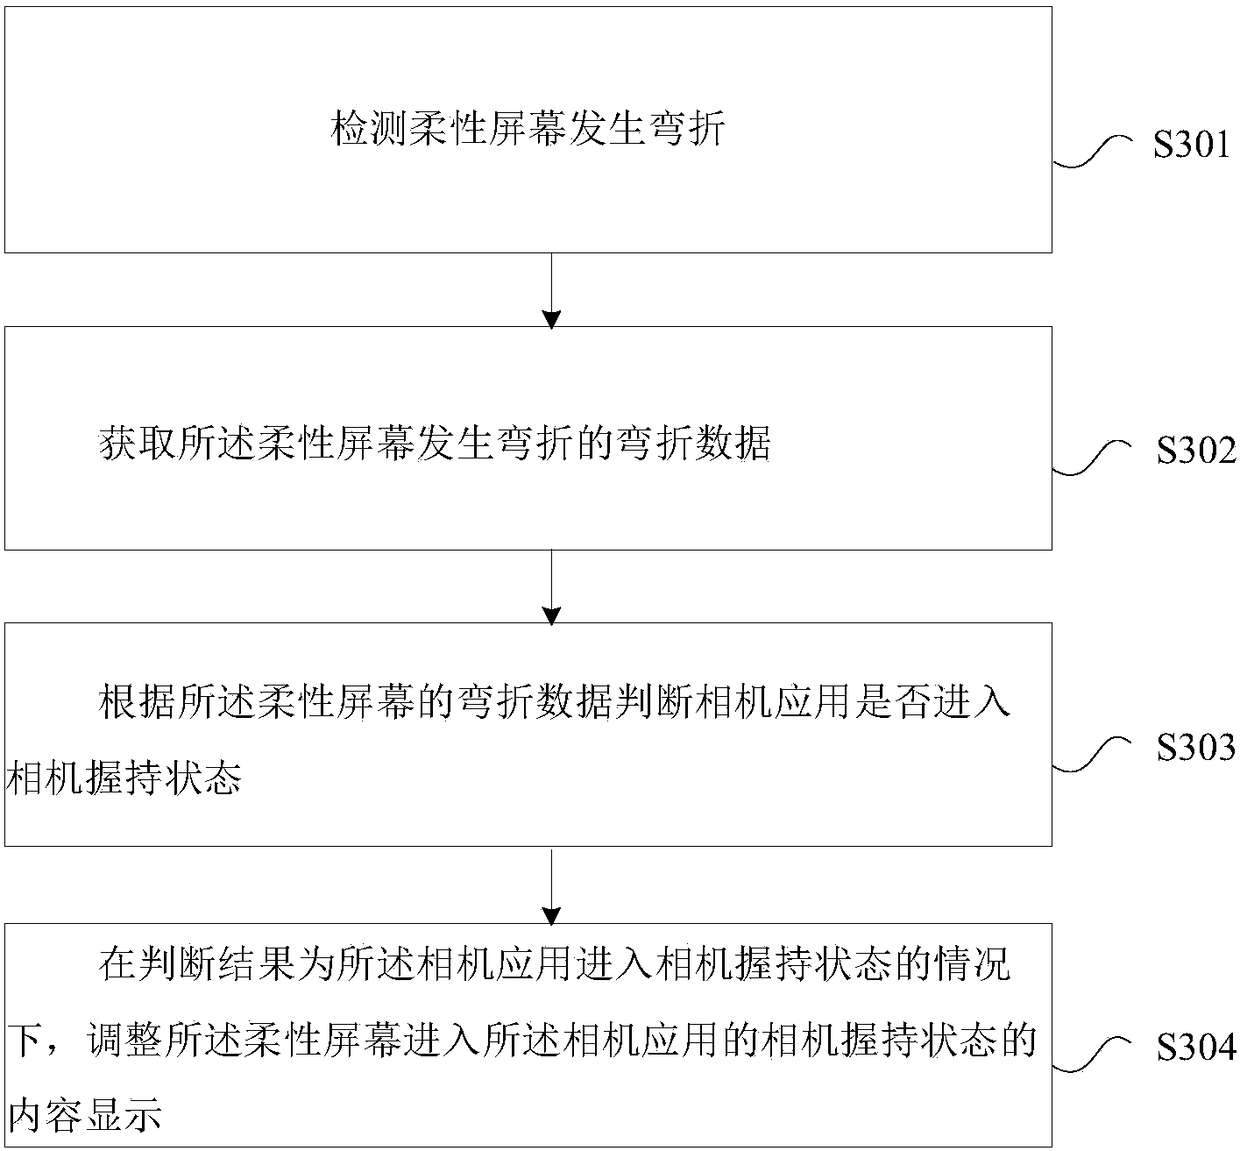 Display method of camera application in flexible screen and mobile terminal